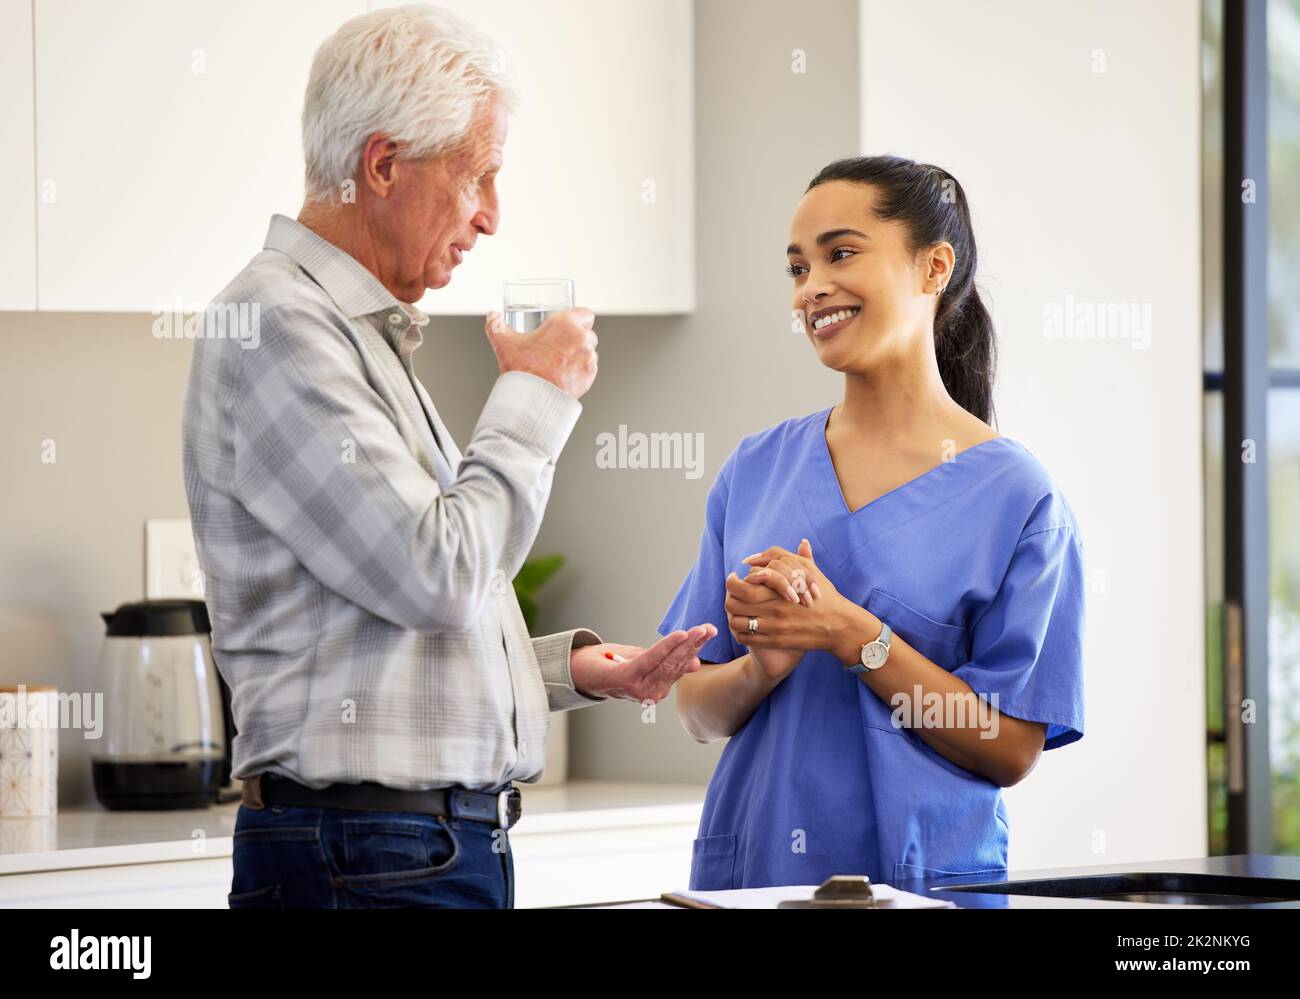 This medication should help your heart. Shot of a nurse watching her elderly patient taking his medication. Stock Photo